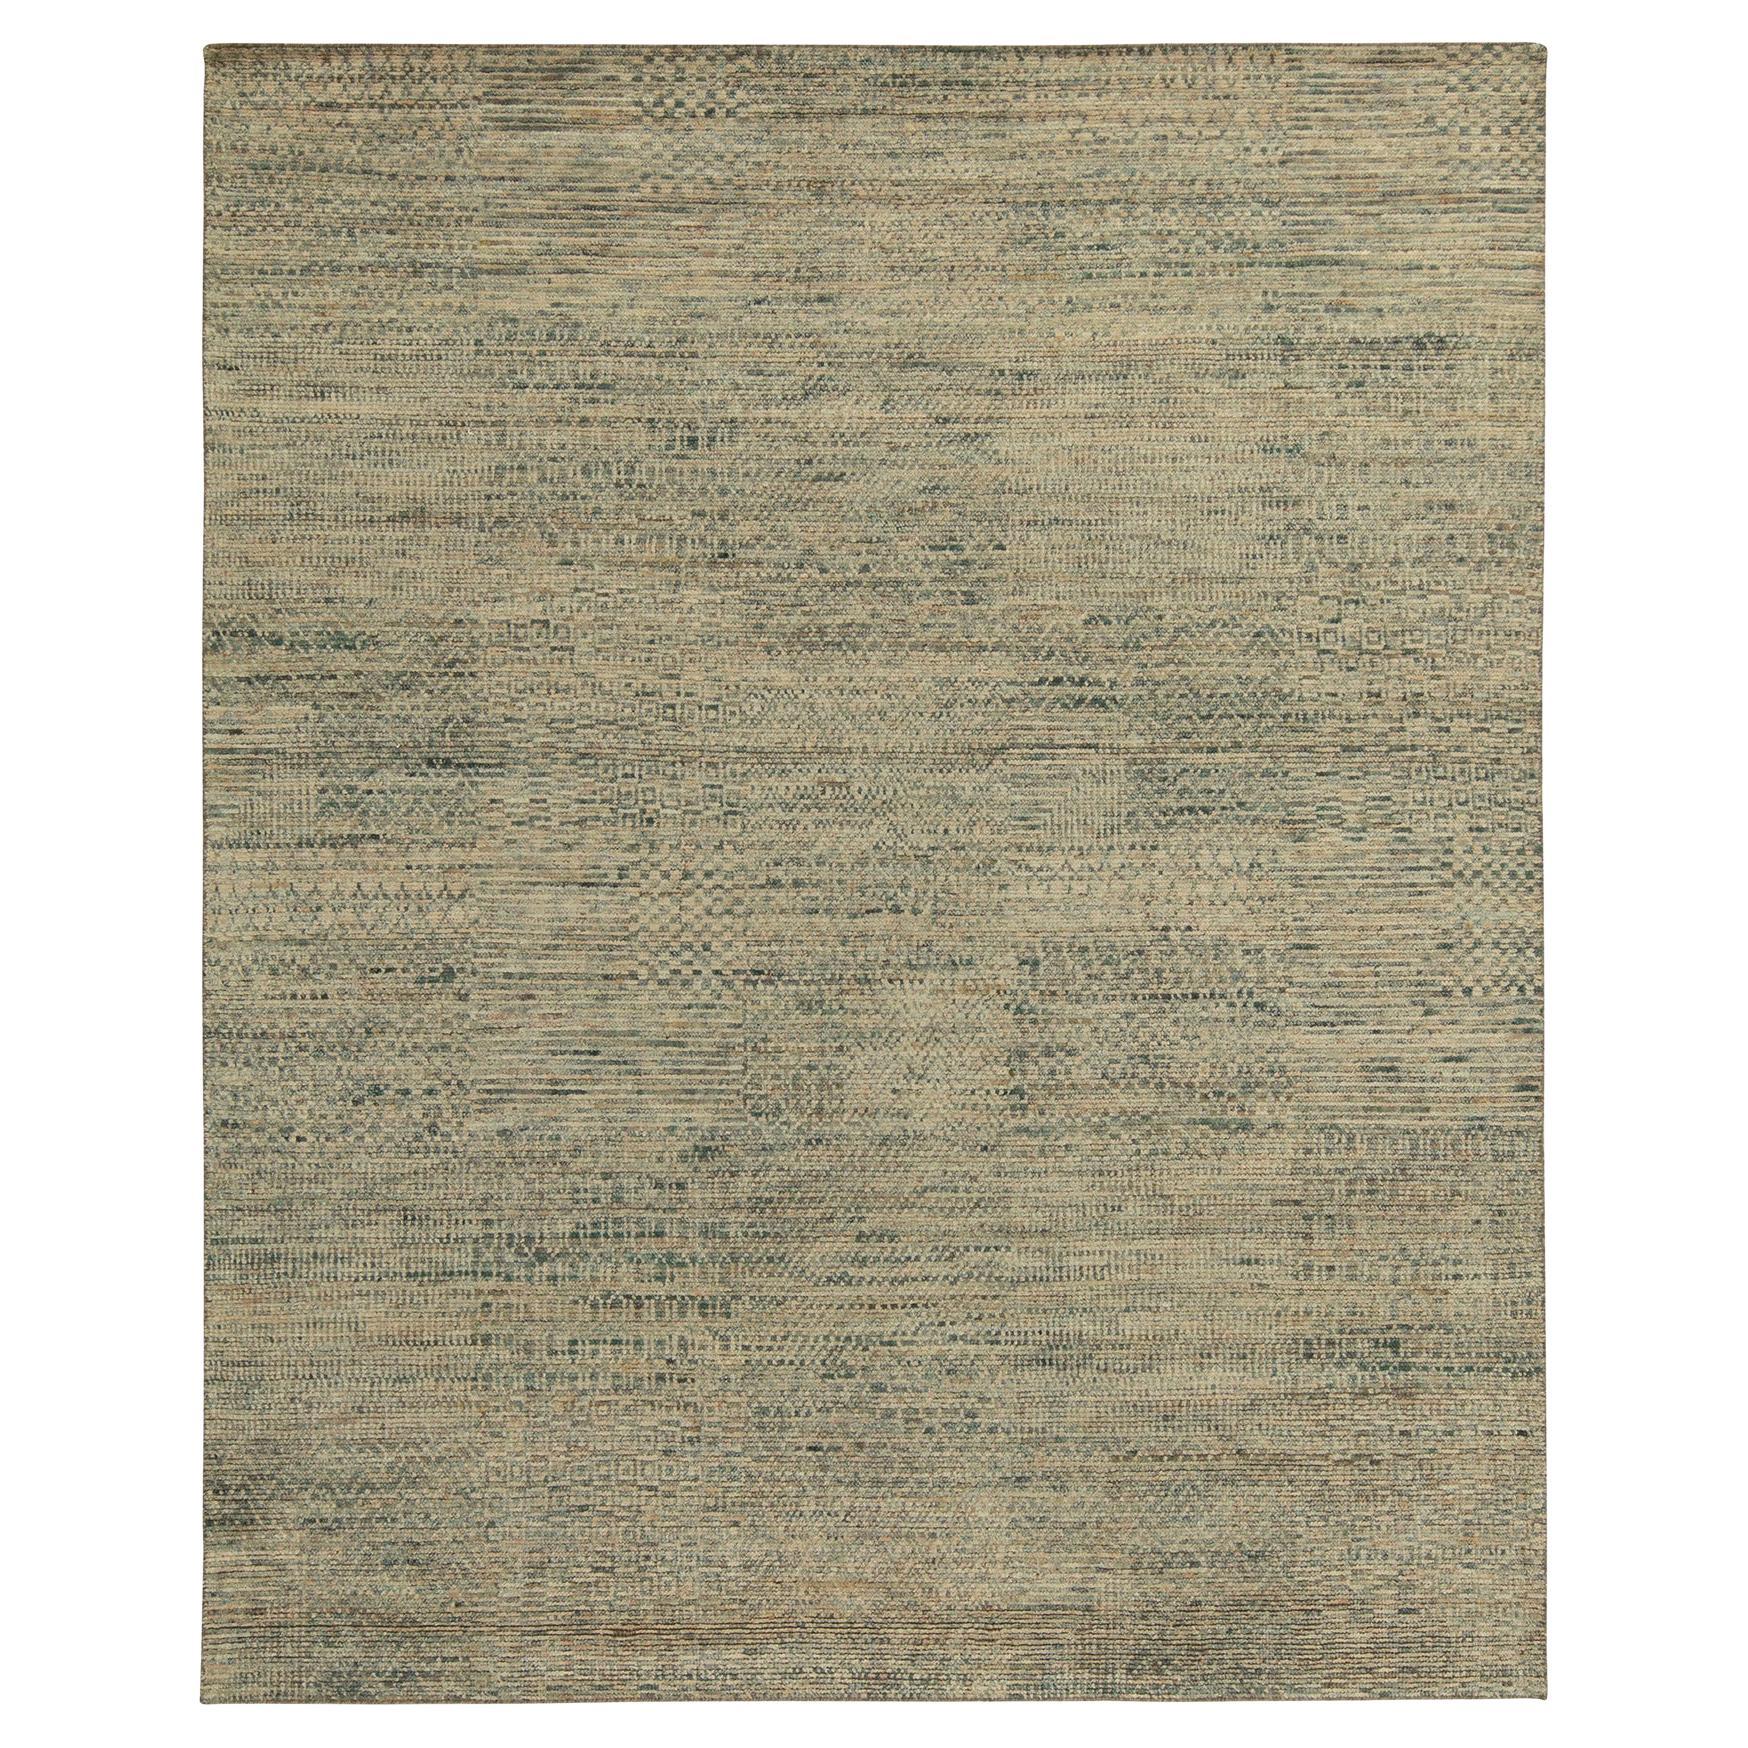 Hand knotted in luxurious quality silk, a bold 8 x 10 contemporary rug with exceptional textural element and visual depth. This particular modern design displays a series of squared delegations of patterns united by the striae of beige and blue